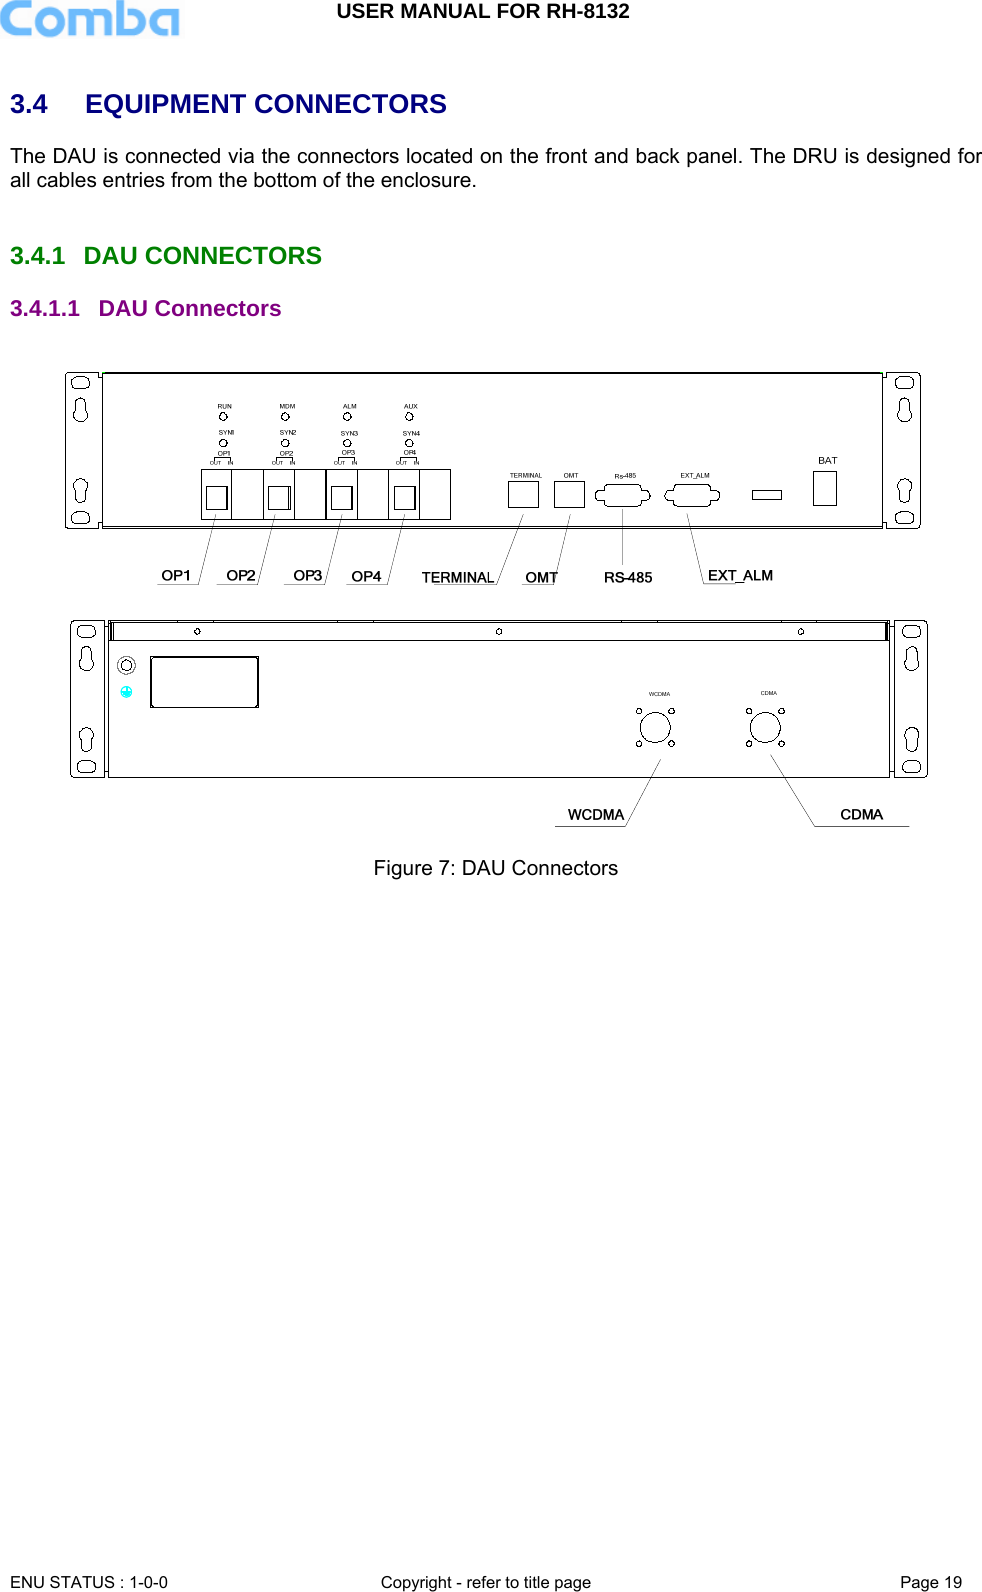 USER MANUAL FOR RH-8132     ENU STATUS : 1-0-0  Copyright - refer to title page  Page 19   3.4 EQUIPMENT CONNECTORS The DAU is connected via the connectors located on the front and back panel. The DRU is designed for all cables entries from the bottom of the enclosure.   3.4.1 DAU CONNECTORS 3.4.1.1  DAU Connectors     Figure 7: DAU Connectors   